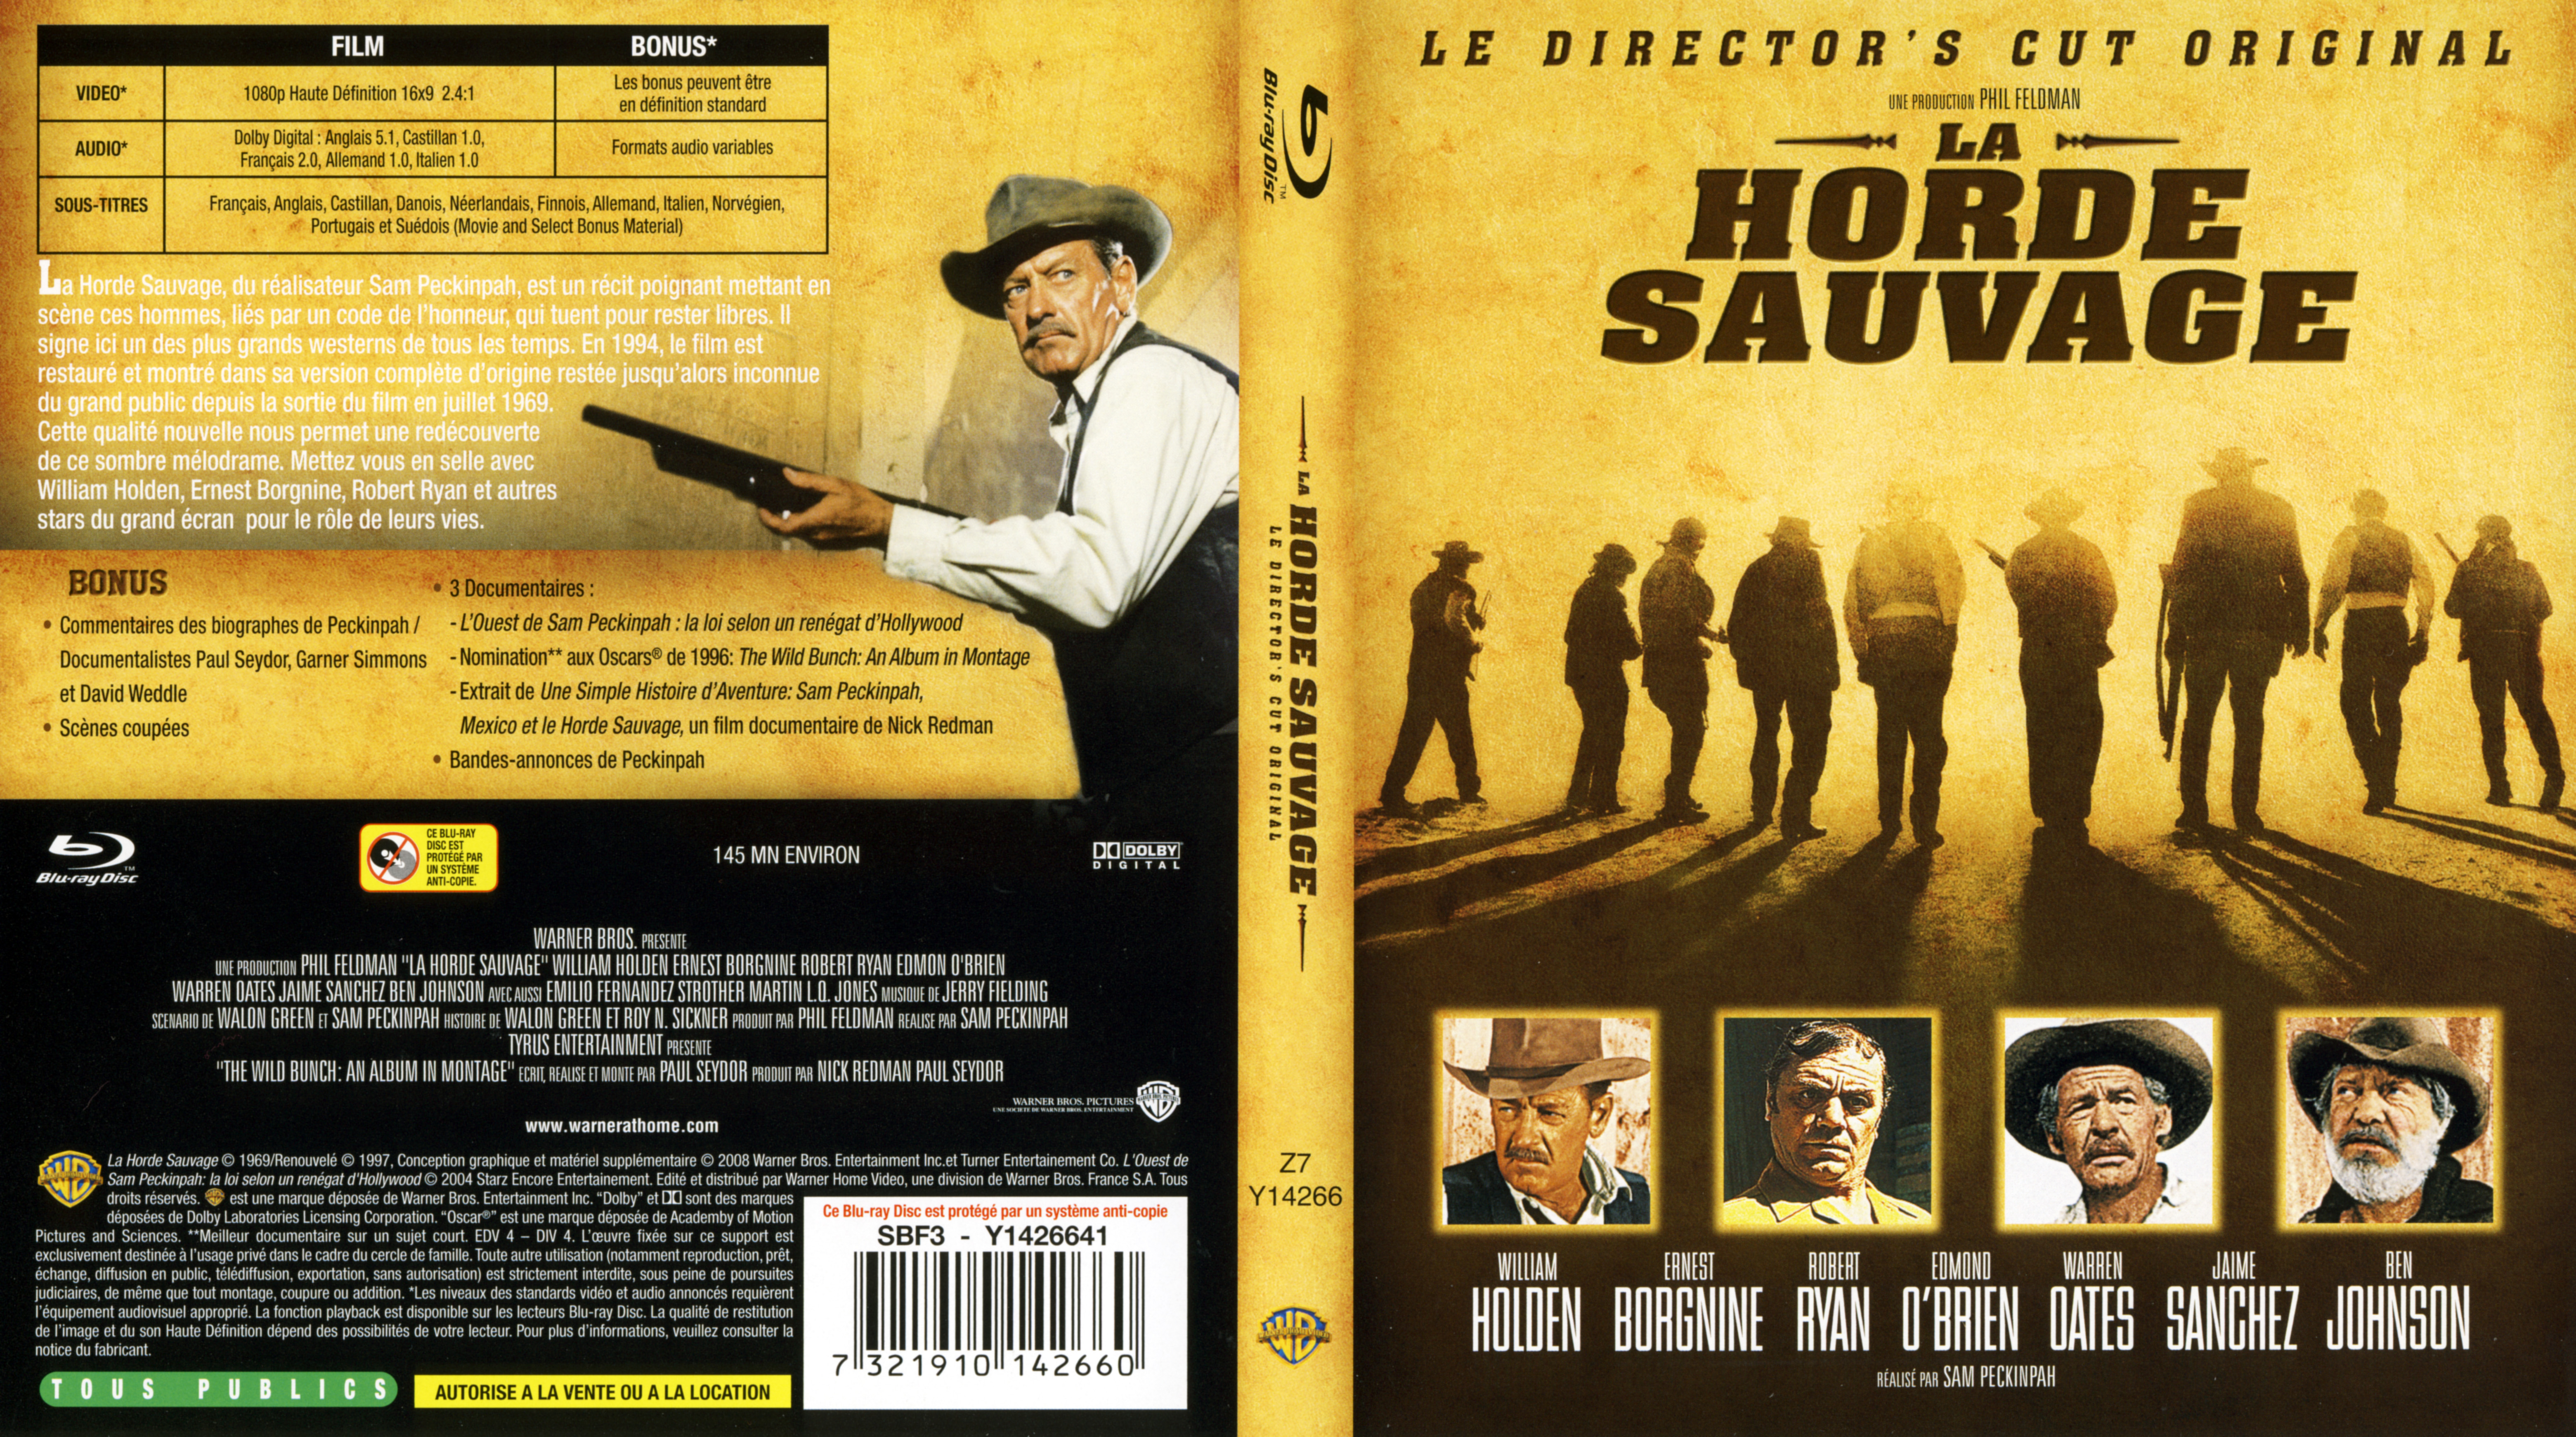 Jaquette DVD La horde sauvage (BLU-RAY)